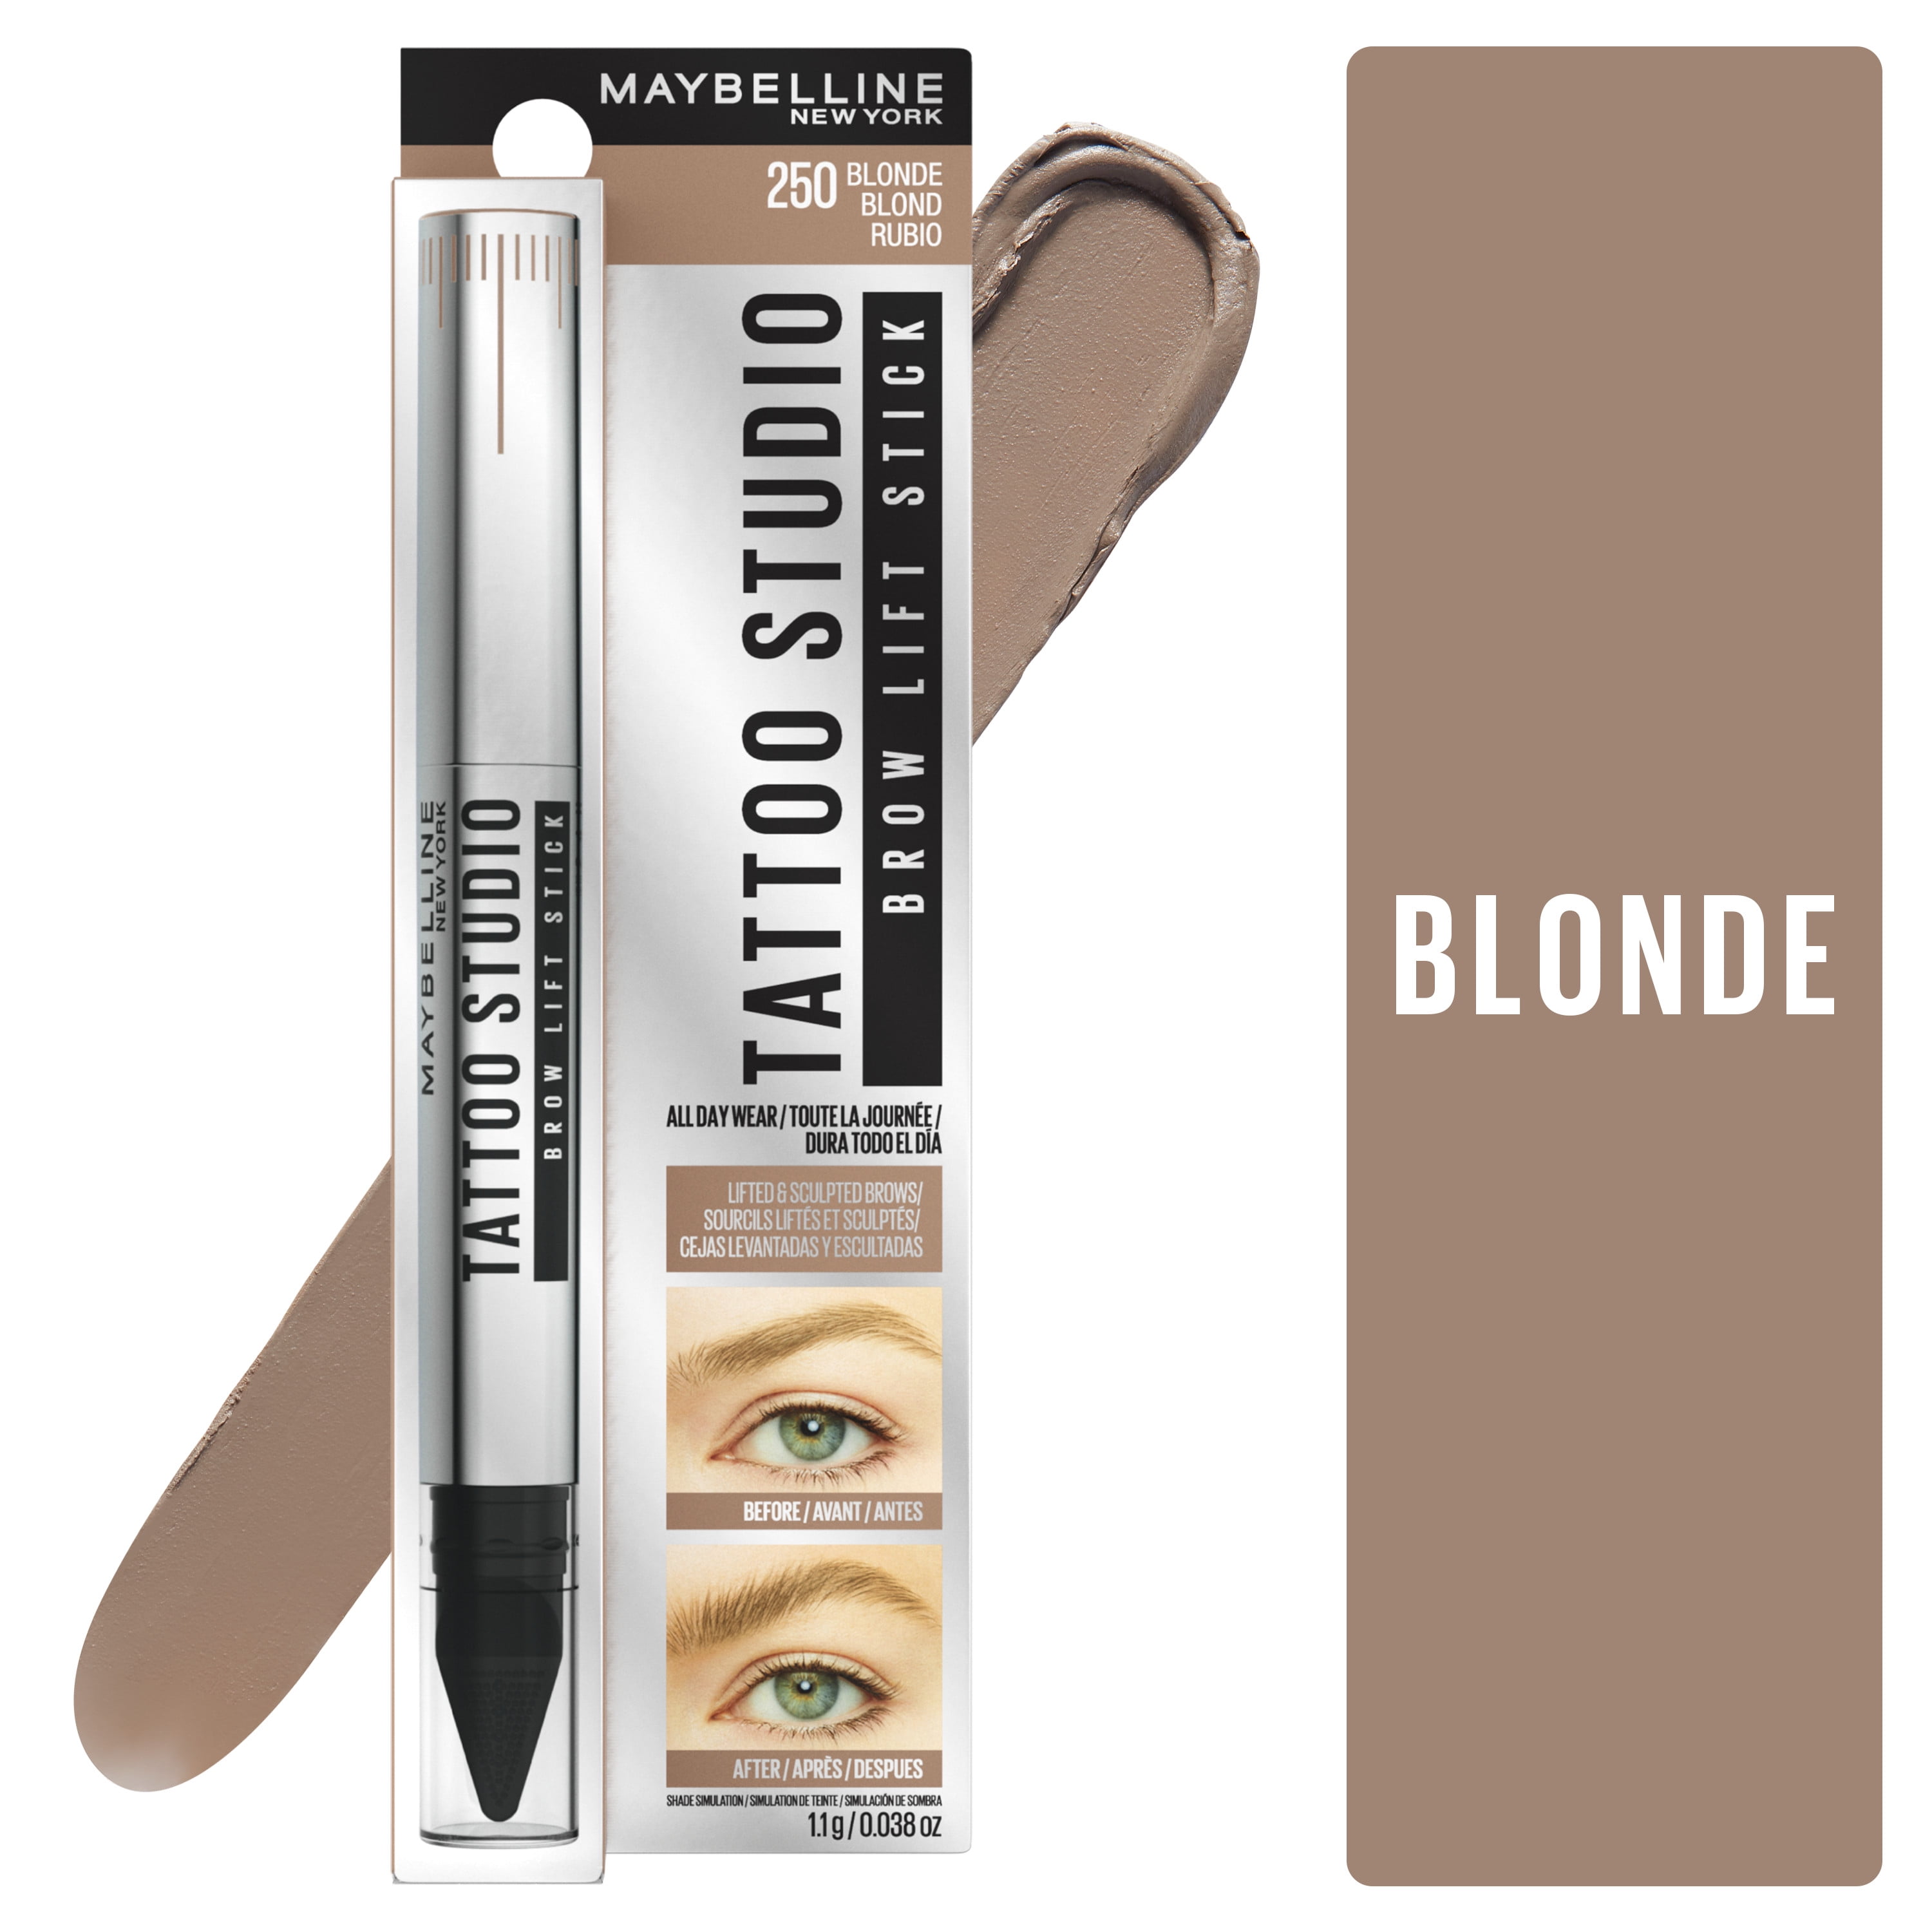 Maybelline Soft Smudge Stick, Fade Resistant Tattoo Studio and Brow Brown Lift